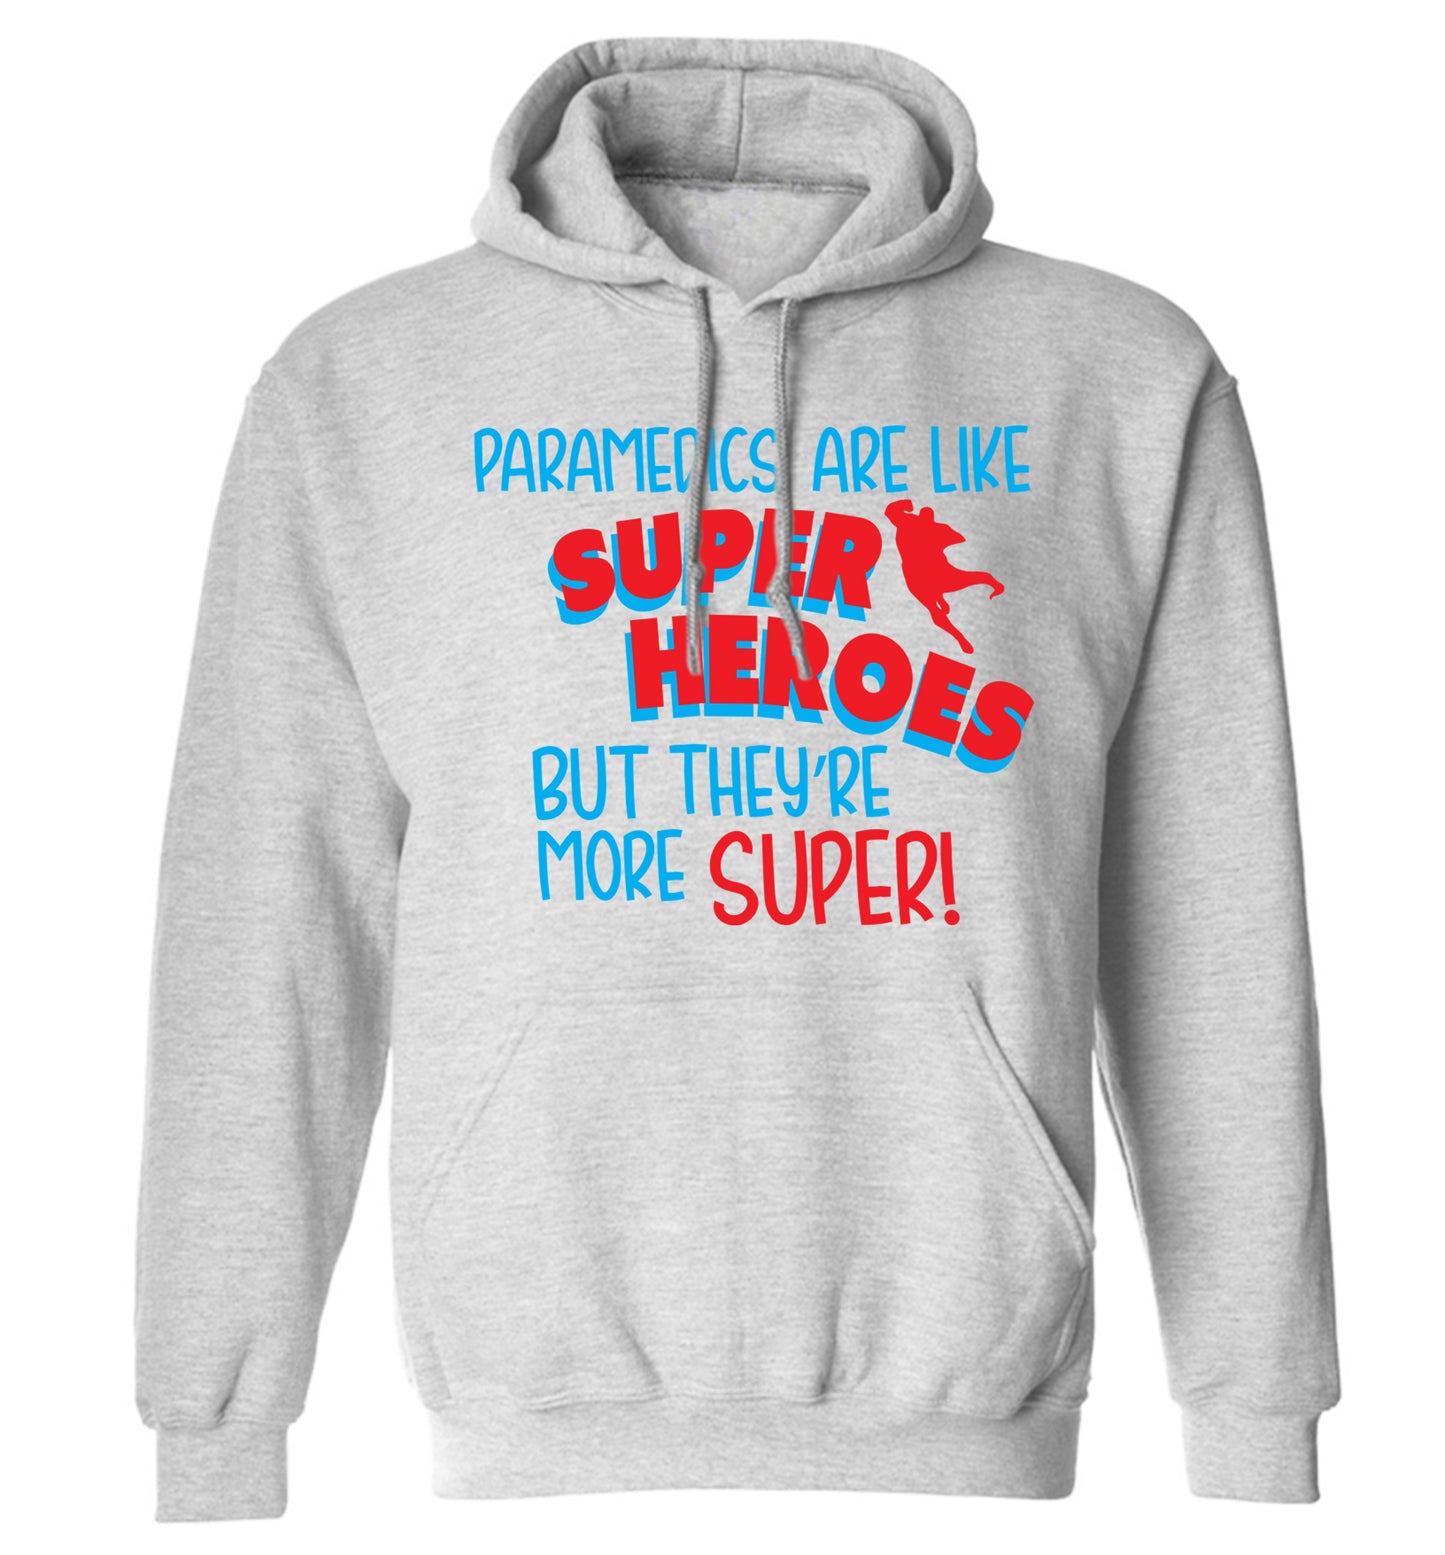 Paramedics are like superheros but they're more super adults unisex grey hoodie 2XL